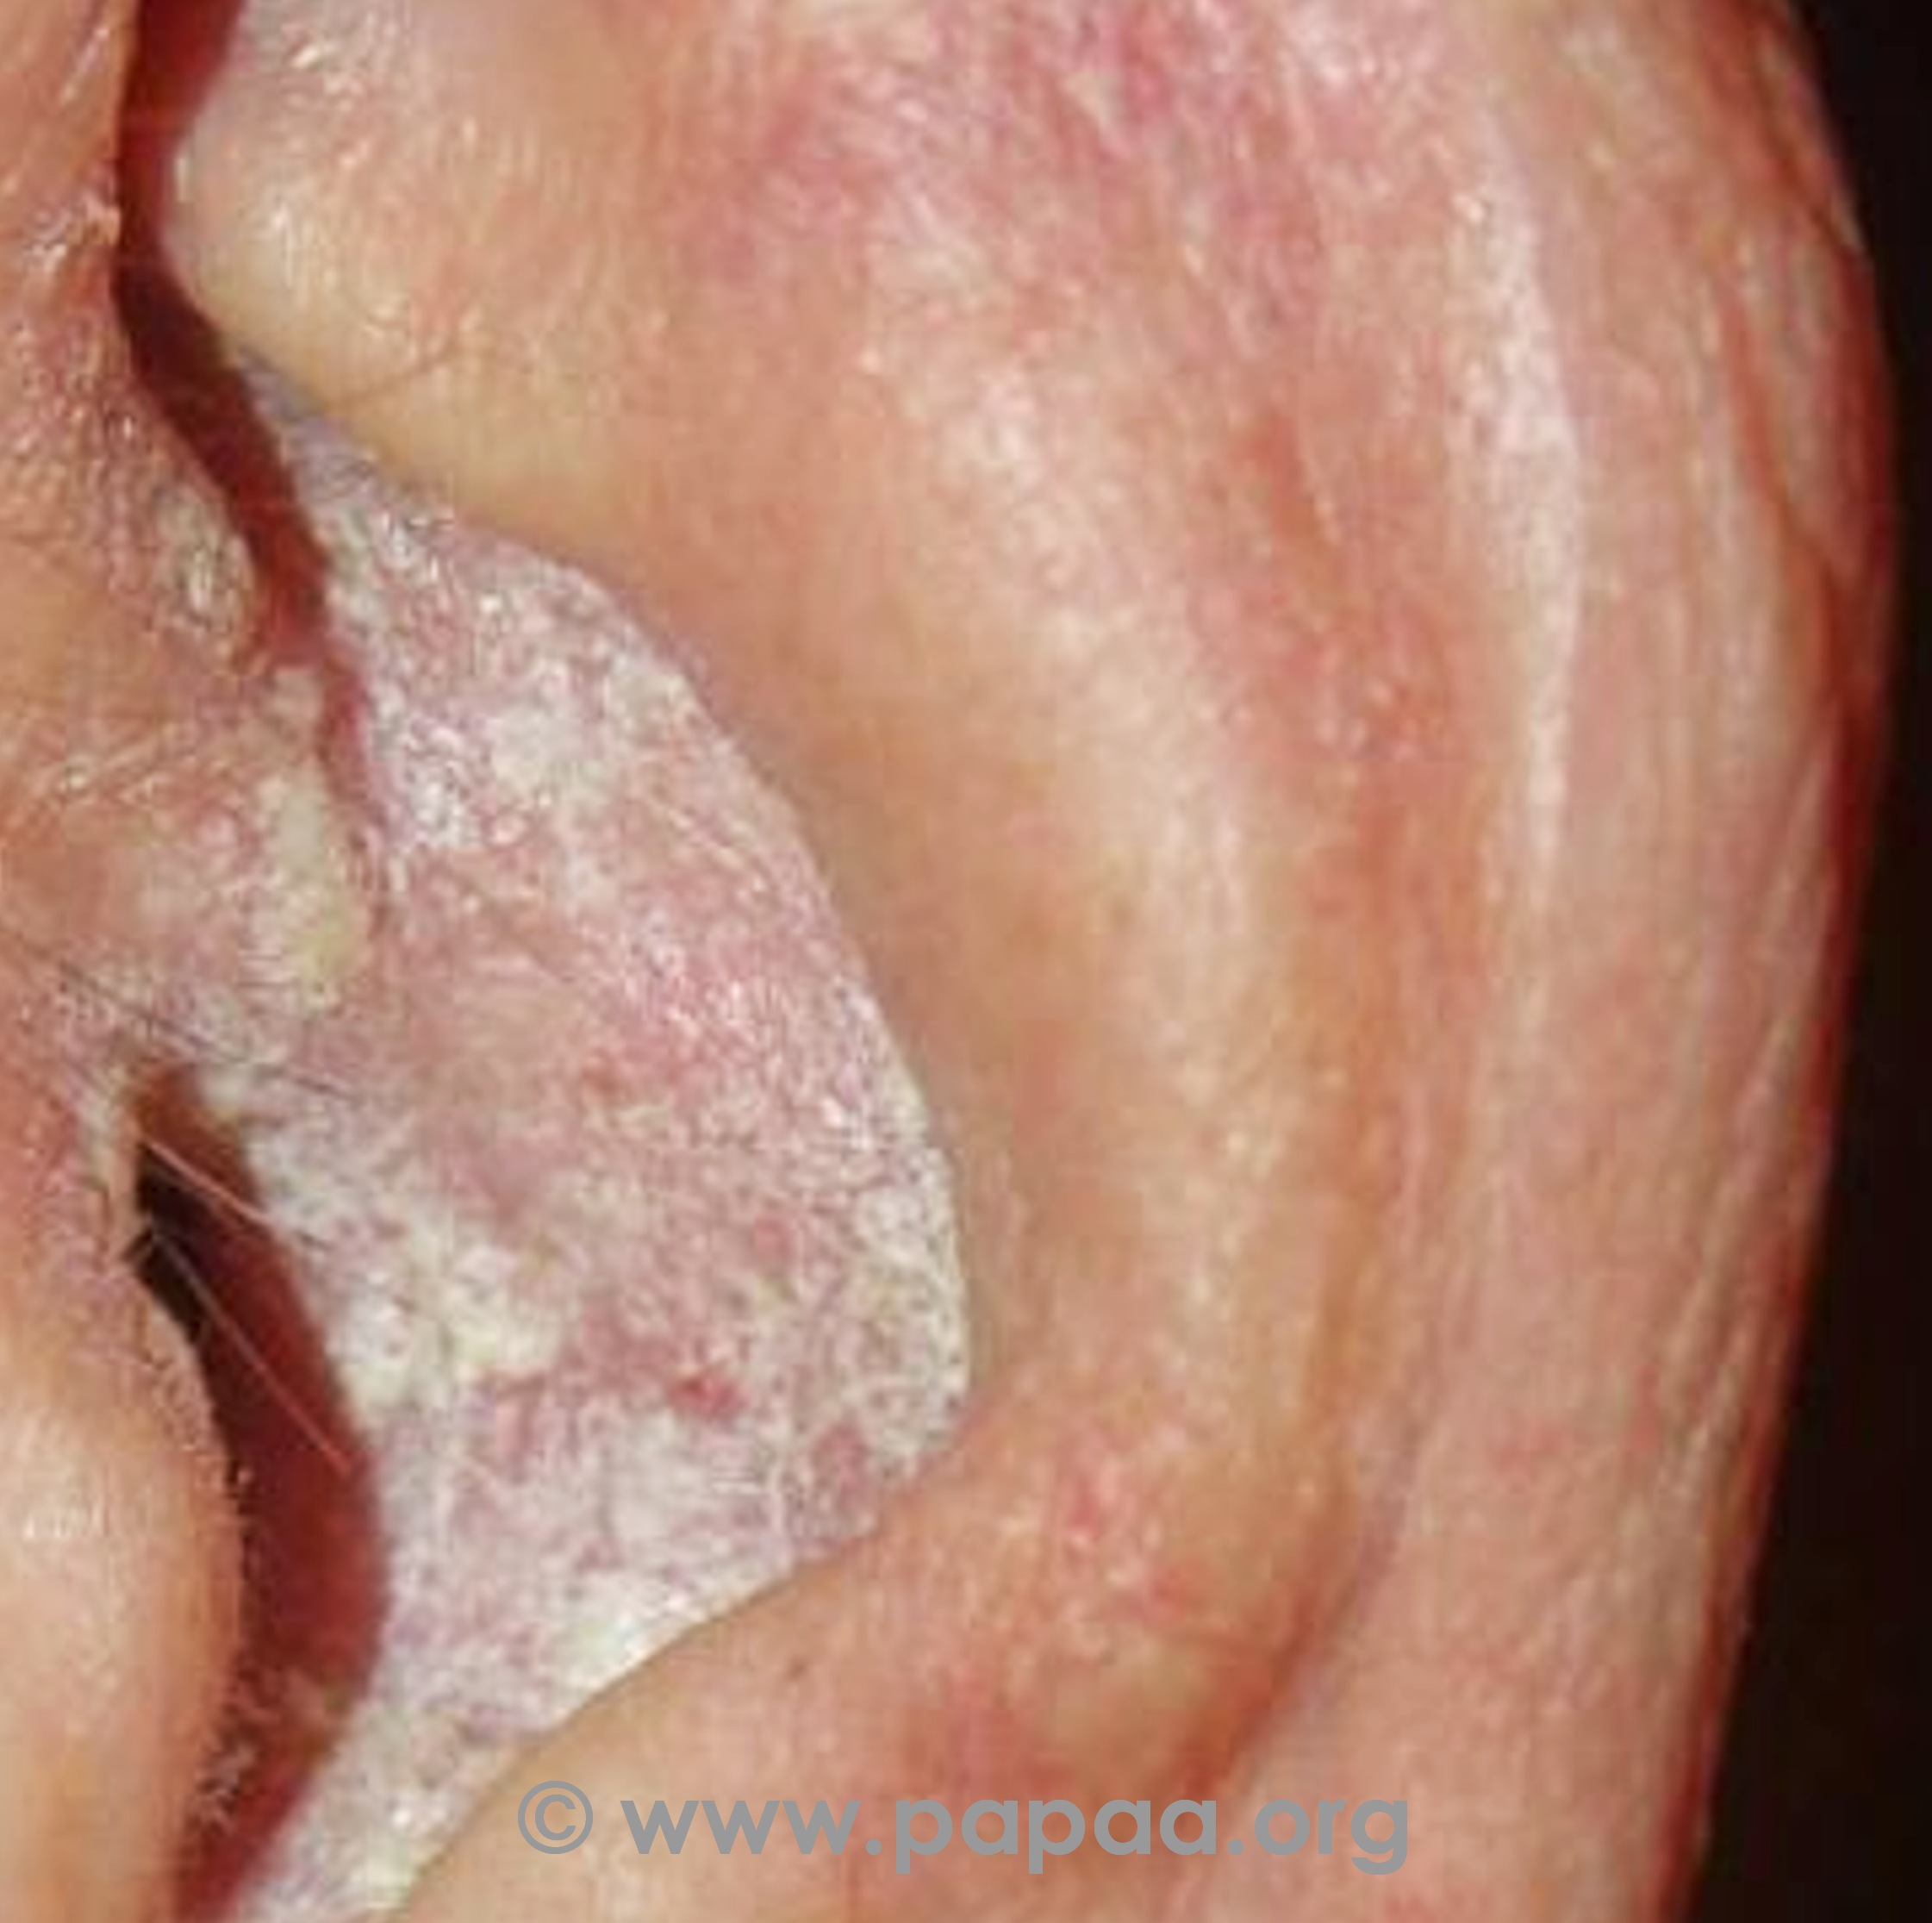 Psoriasis in ear (scaly blocking canal)